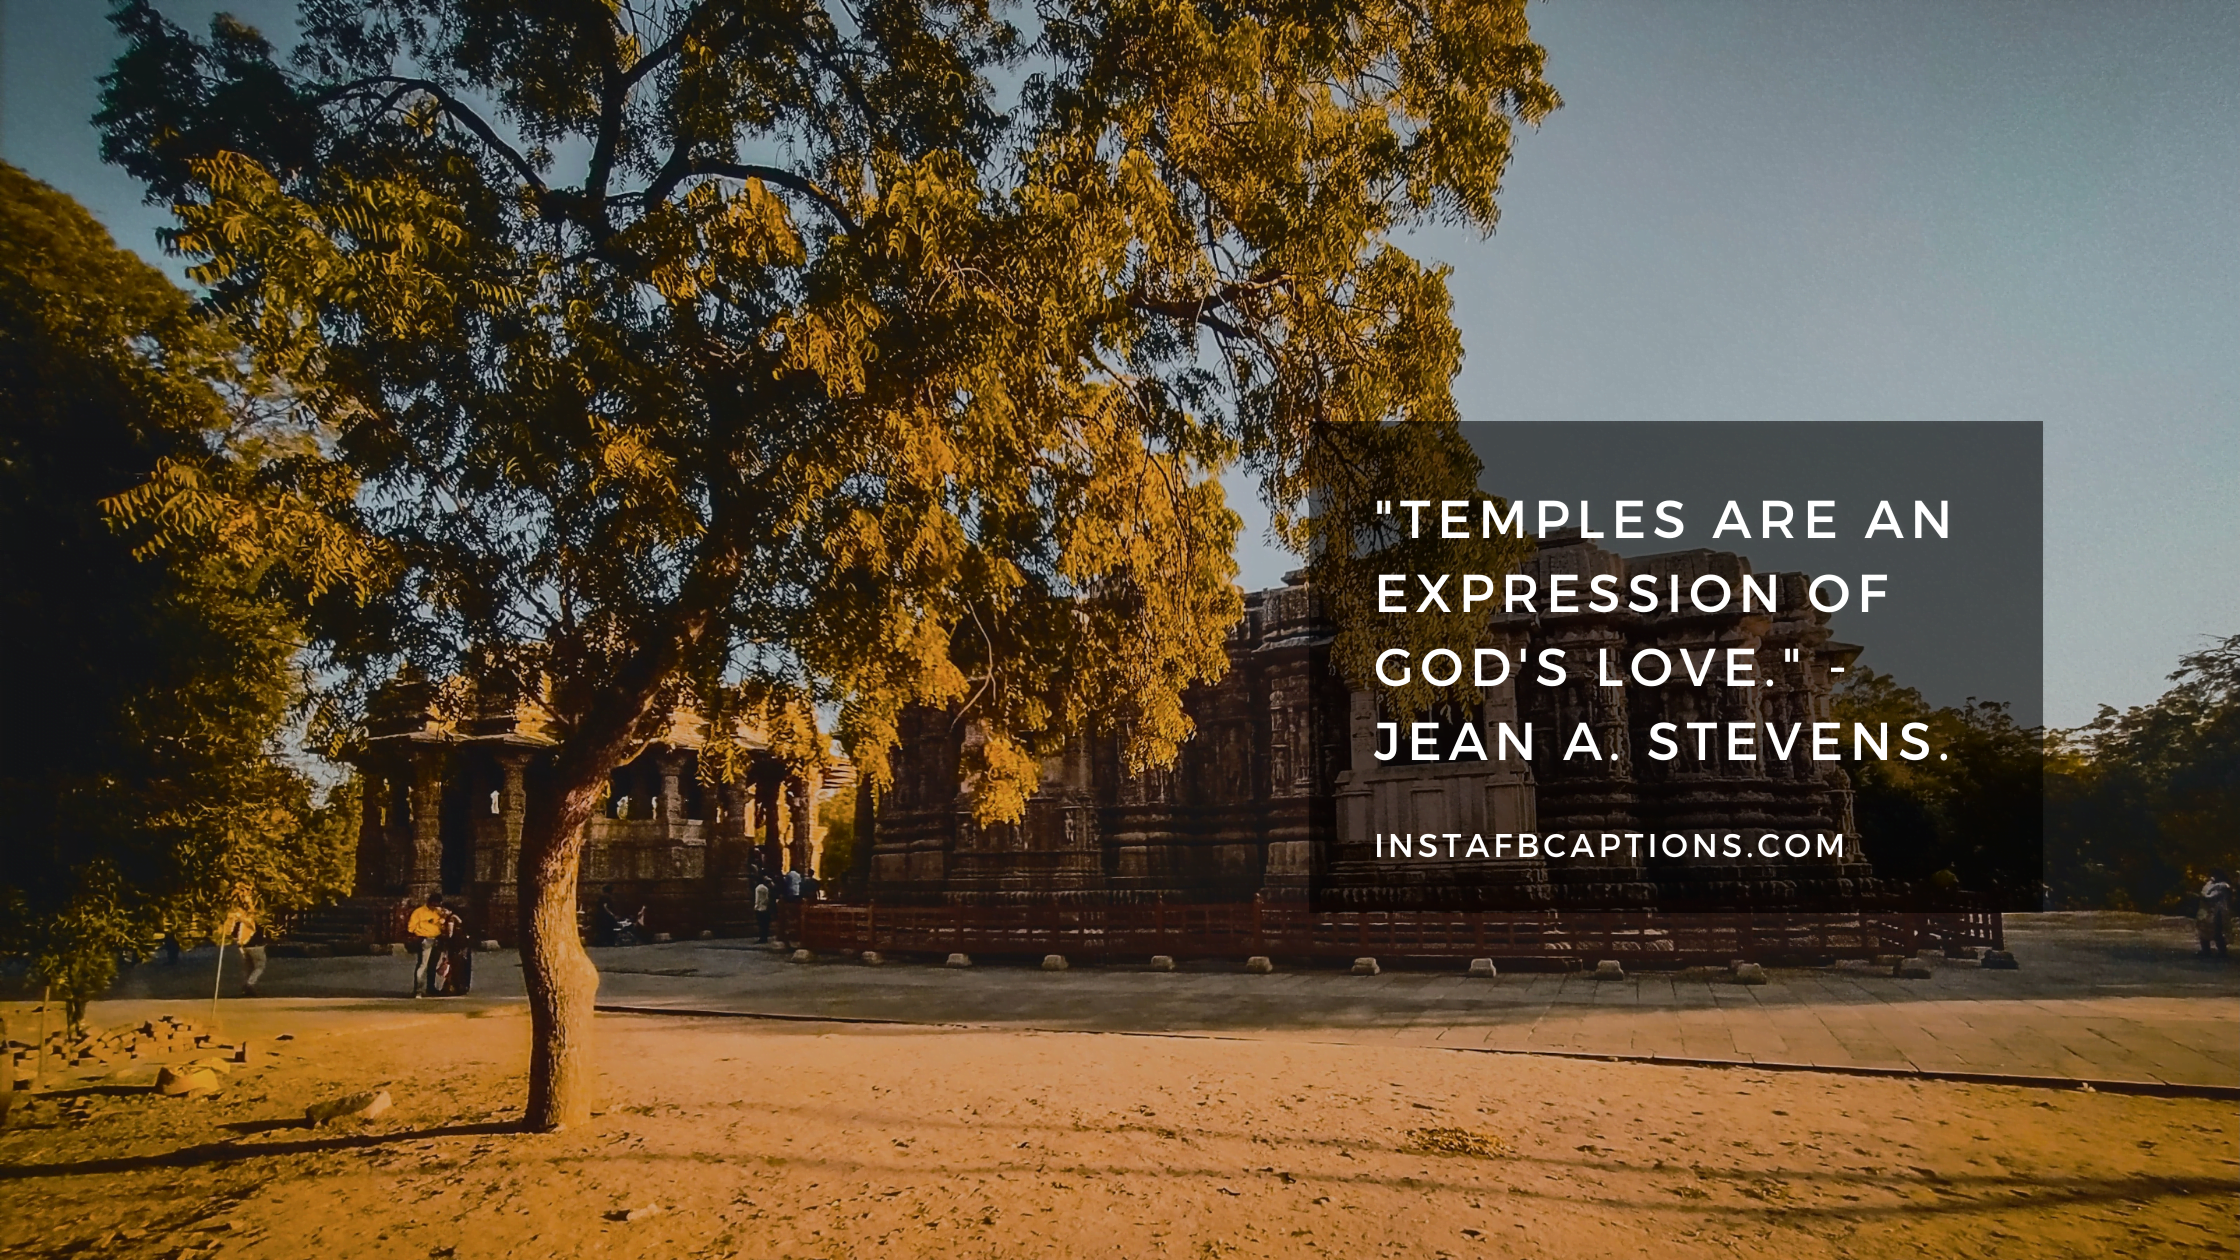 "Temples are an expression of God's love." - Jean A. Stevens  - Sun Temple Instagram Captions - 95+ Temple Photo Instagram Captions, Quotes &#038; Hashtags 2023